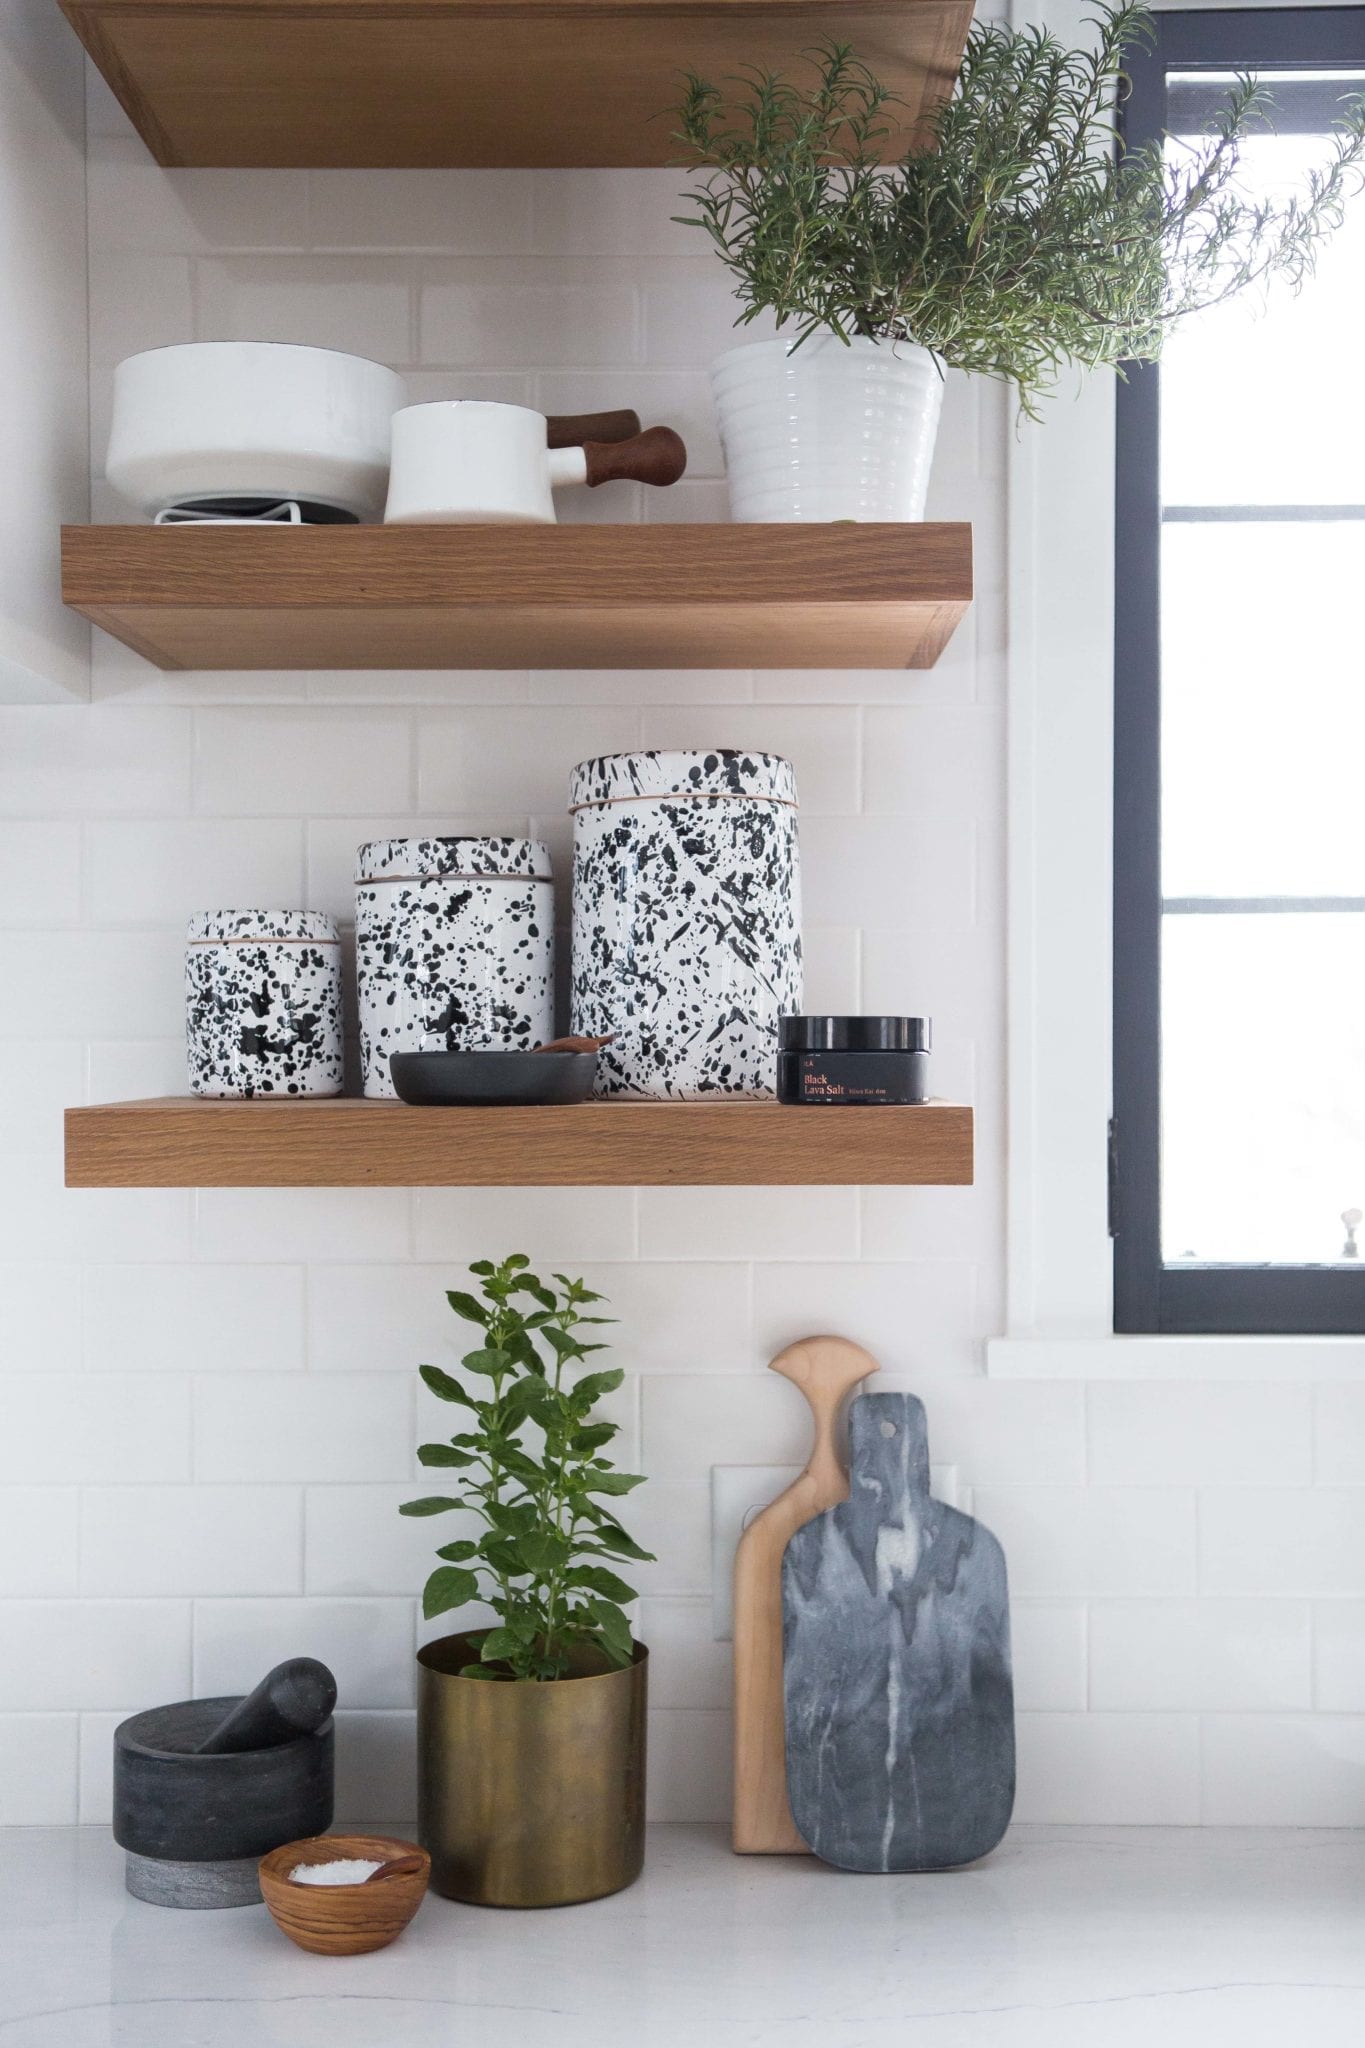 Home Design Projects: Install Floating Shelves